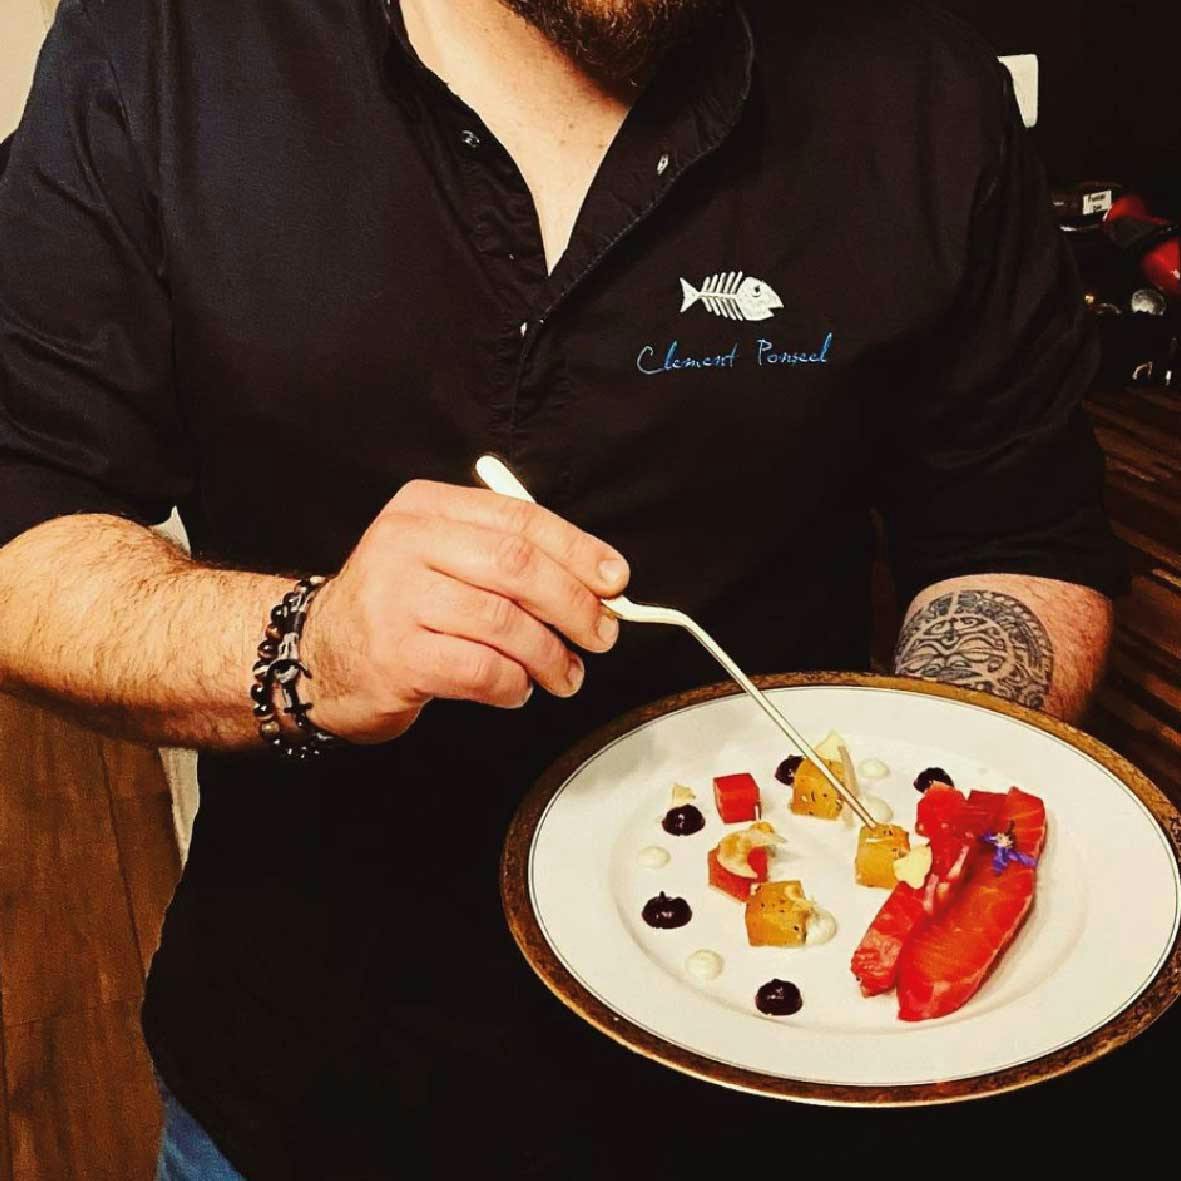 Chef Clément Ponseel's picture